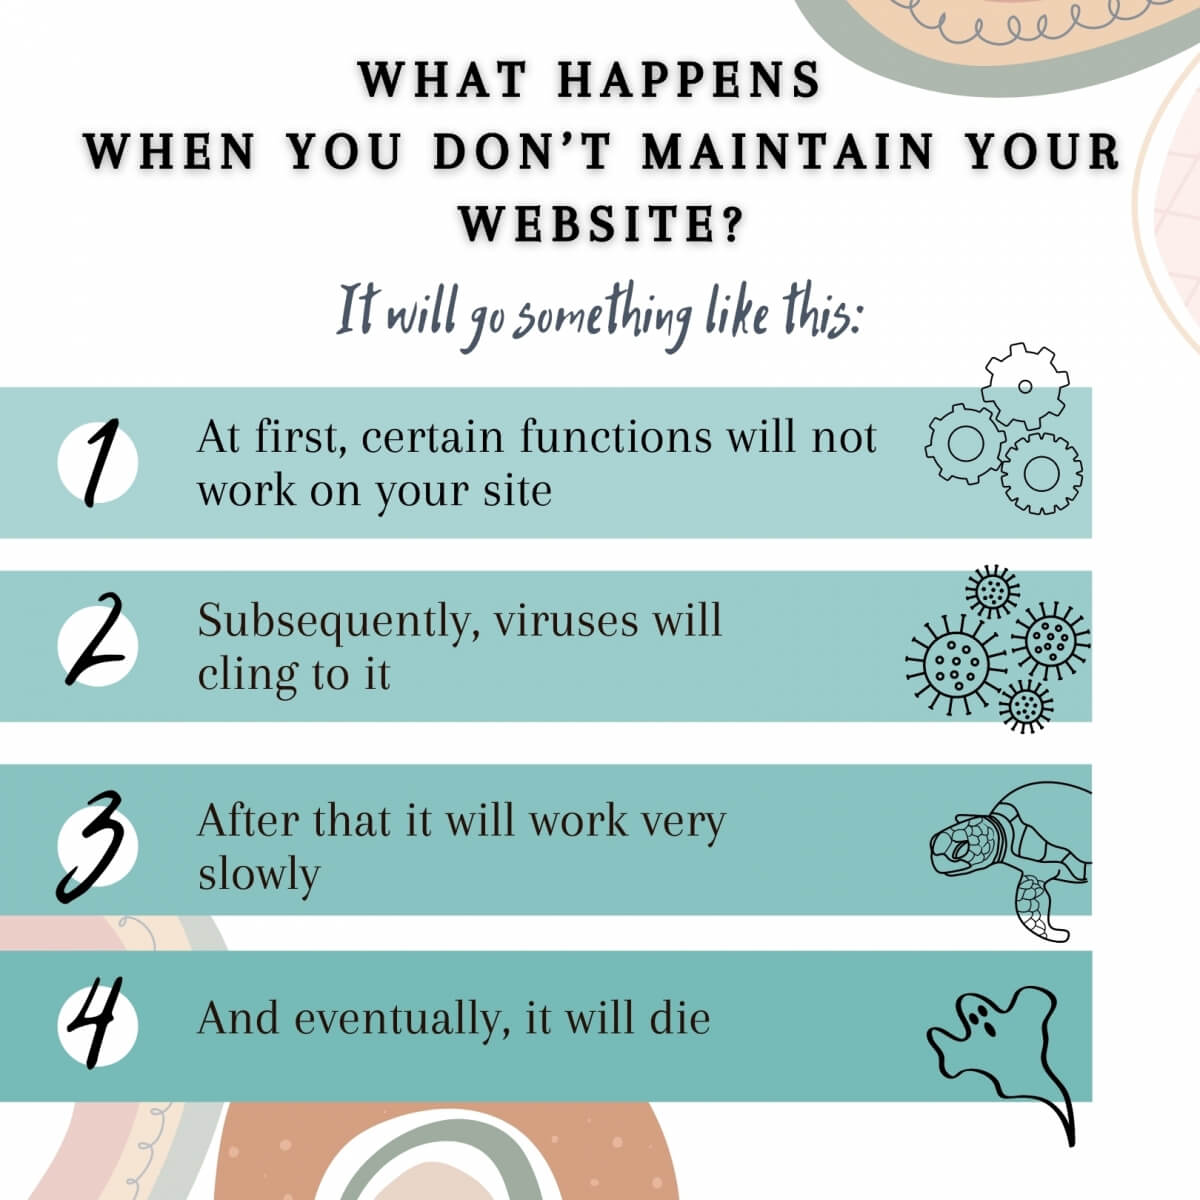 What Happens When You Don’t Maintain Your Website?